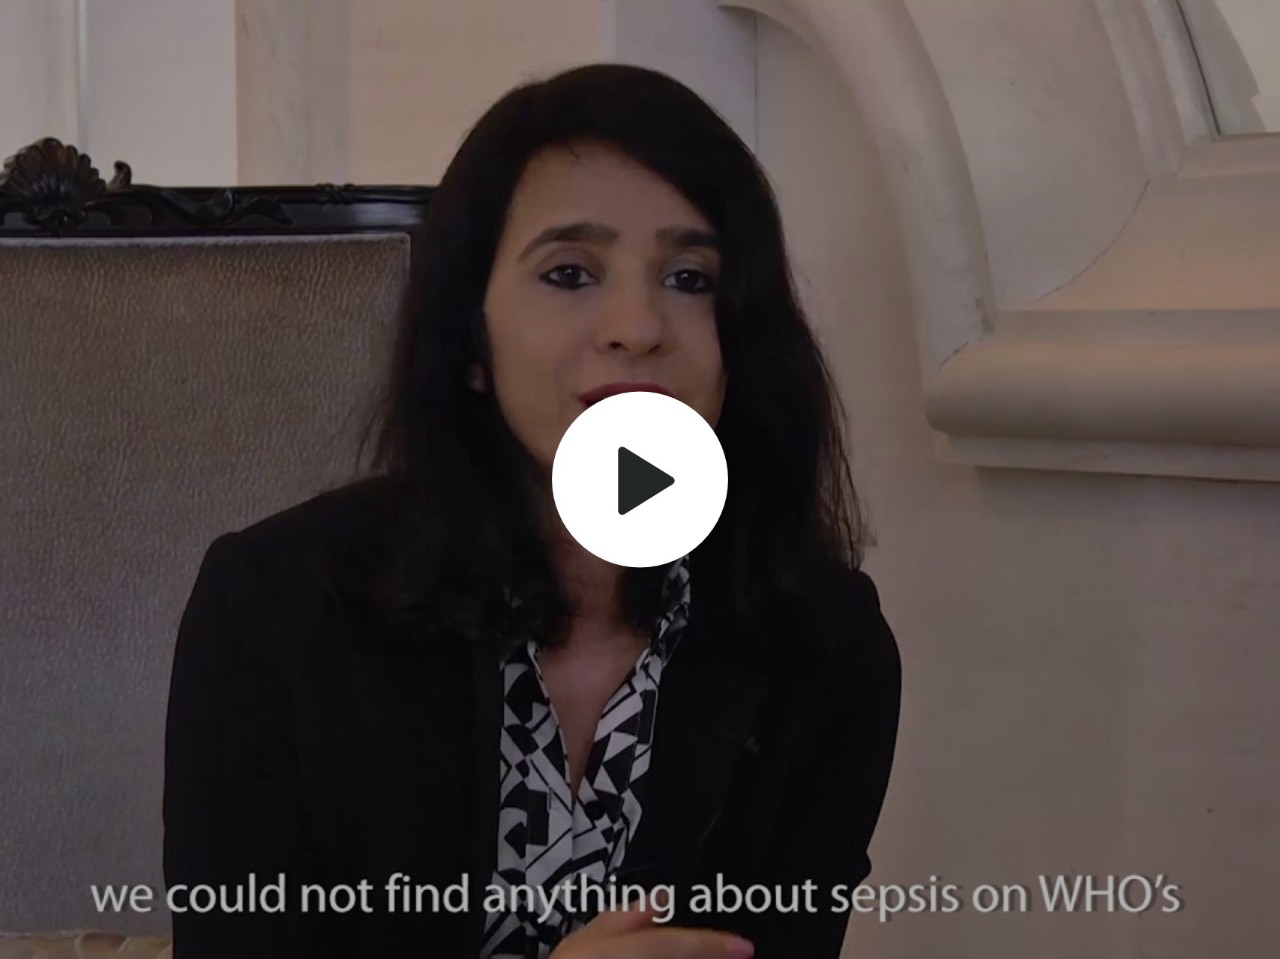 What are the challenges for sepsis treatment